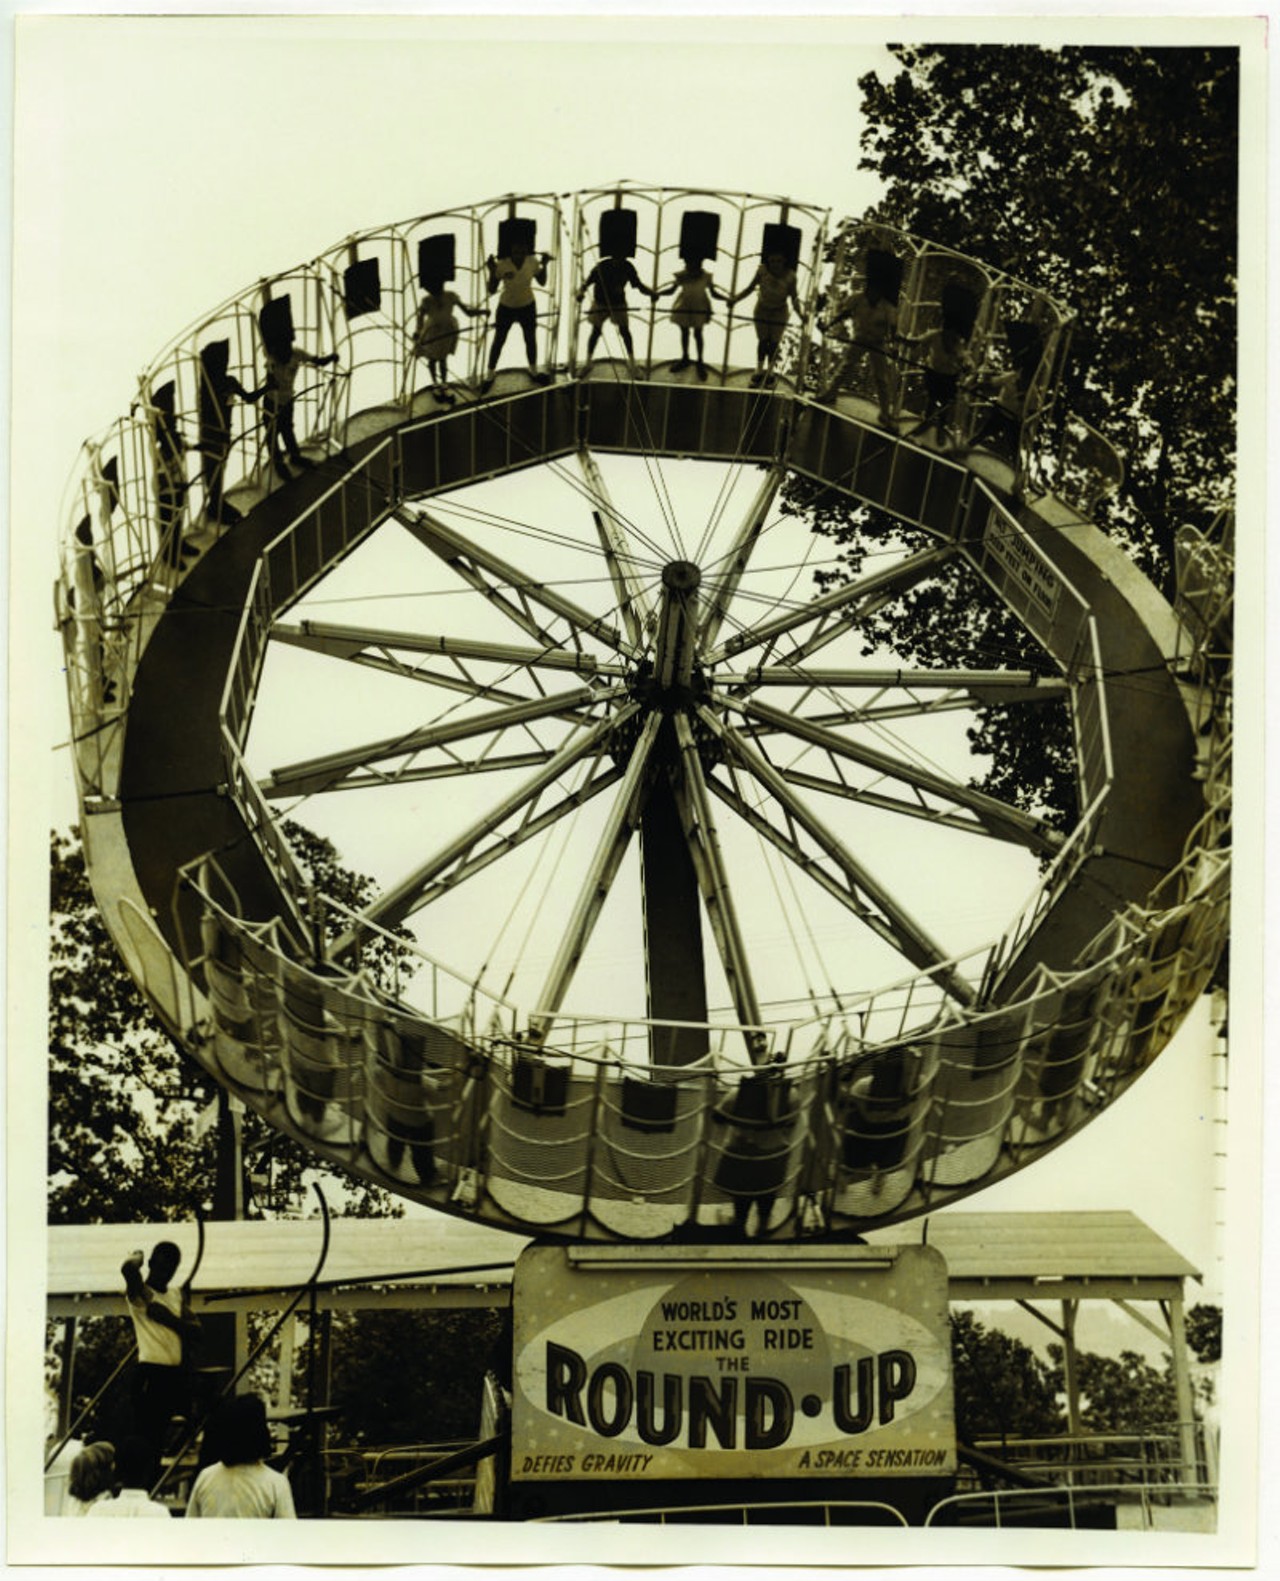 Chain of Rocks Amusement Park
St. Louis, MO
(1927 – 1978)
The Chain of Rocks Amusement Park was along the former Route 66 at the western entrance of Chain of Rocks Bridge. It featured classic amusement rides including a haunted house, a Whip, a Tilt-O-Whirl, and a Sky-Lift, which offered a wonderful view of the mighty Mississippi.